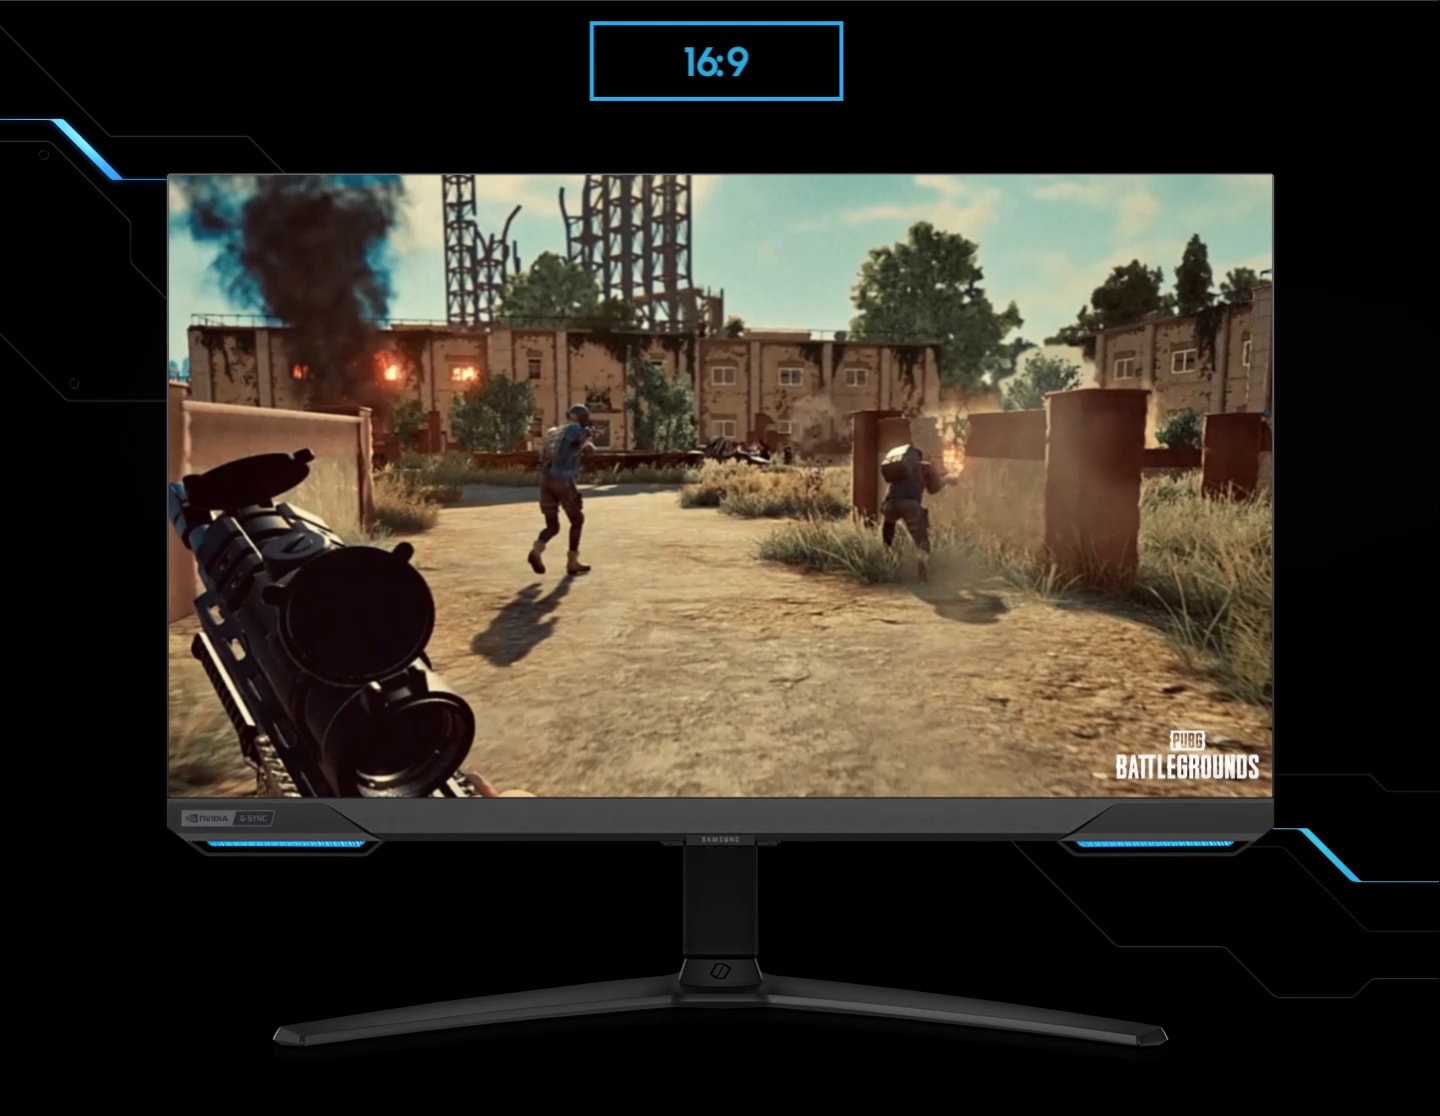 A monitor shows the perspective of a player within a first-person action game. As the screen is extended from 16:9 to 21:9 proportion, an enemy appears in the far left corner, revealed thanks to the monitor's wider perspective. The game title \PUBG BATTLEGROUND\ is located in the lower right corner.